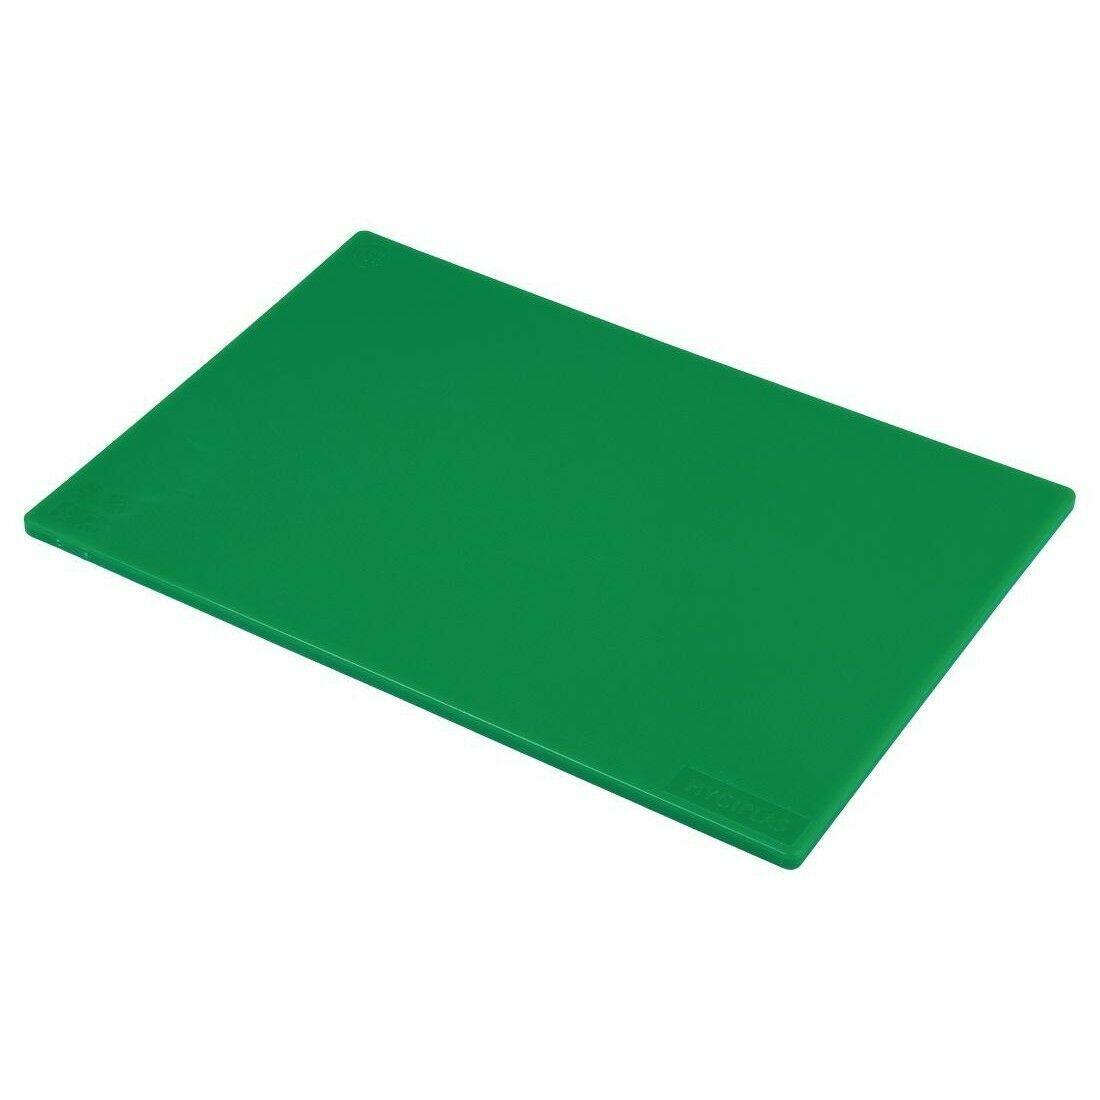 Green Kitchen Chopping Board Commercial Cutting Board Colour Coded Hygiene Catering Food Cutting Set